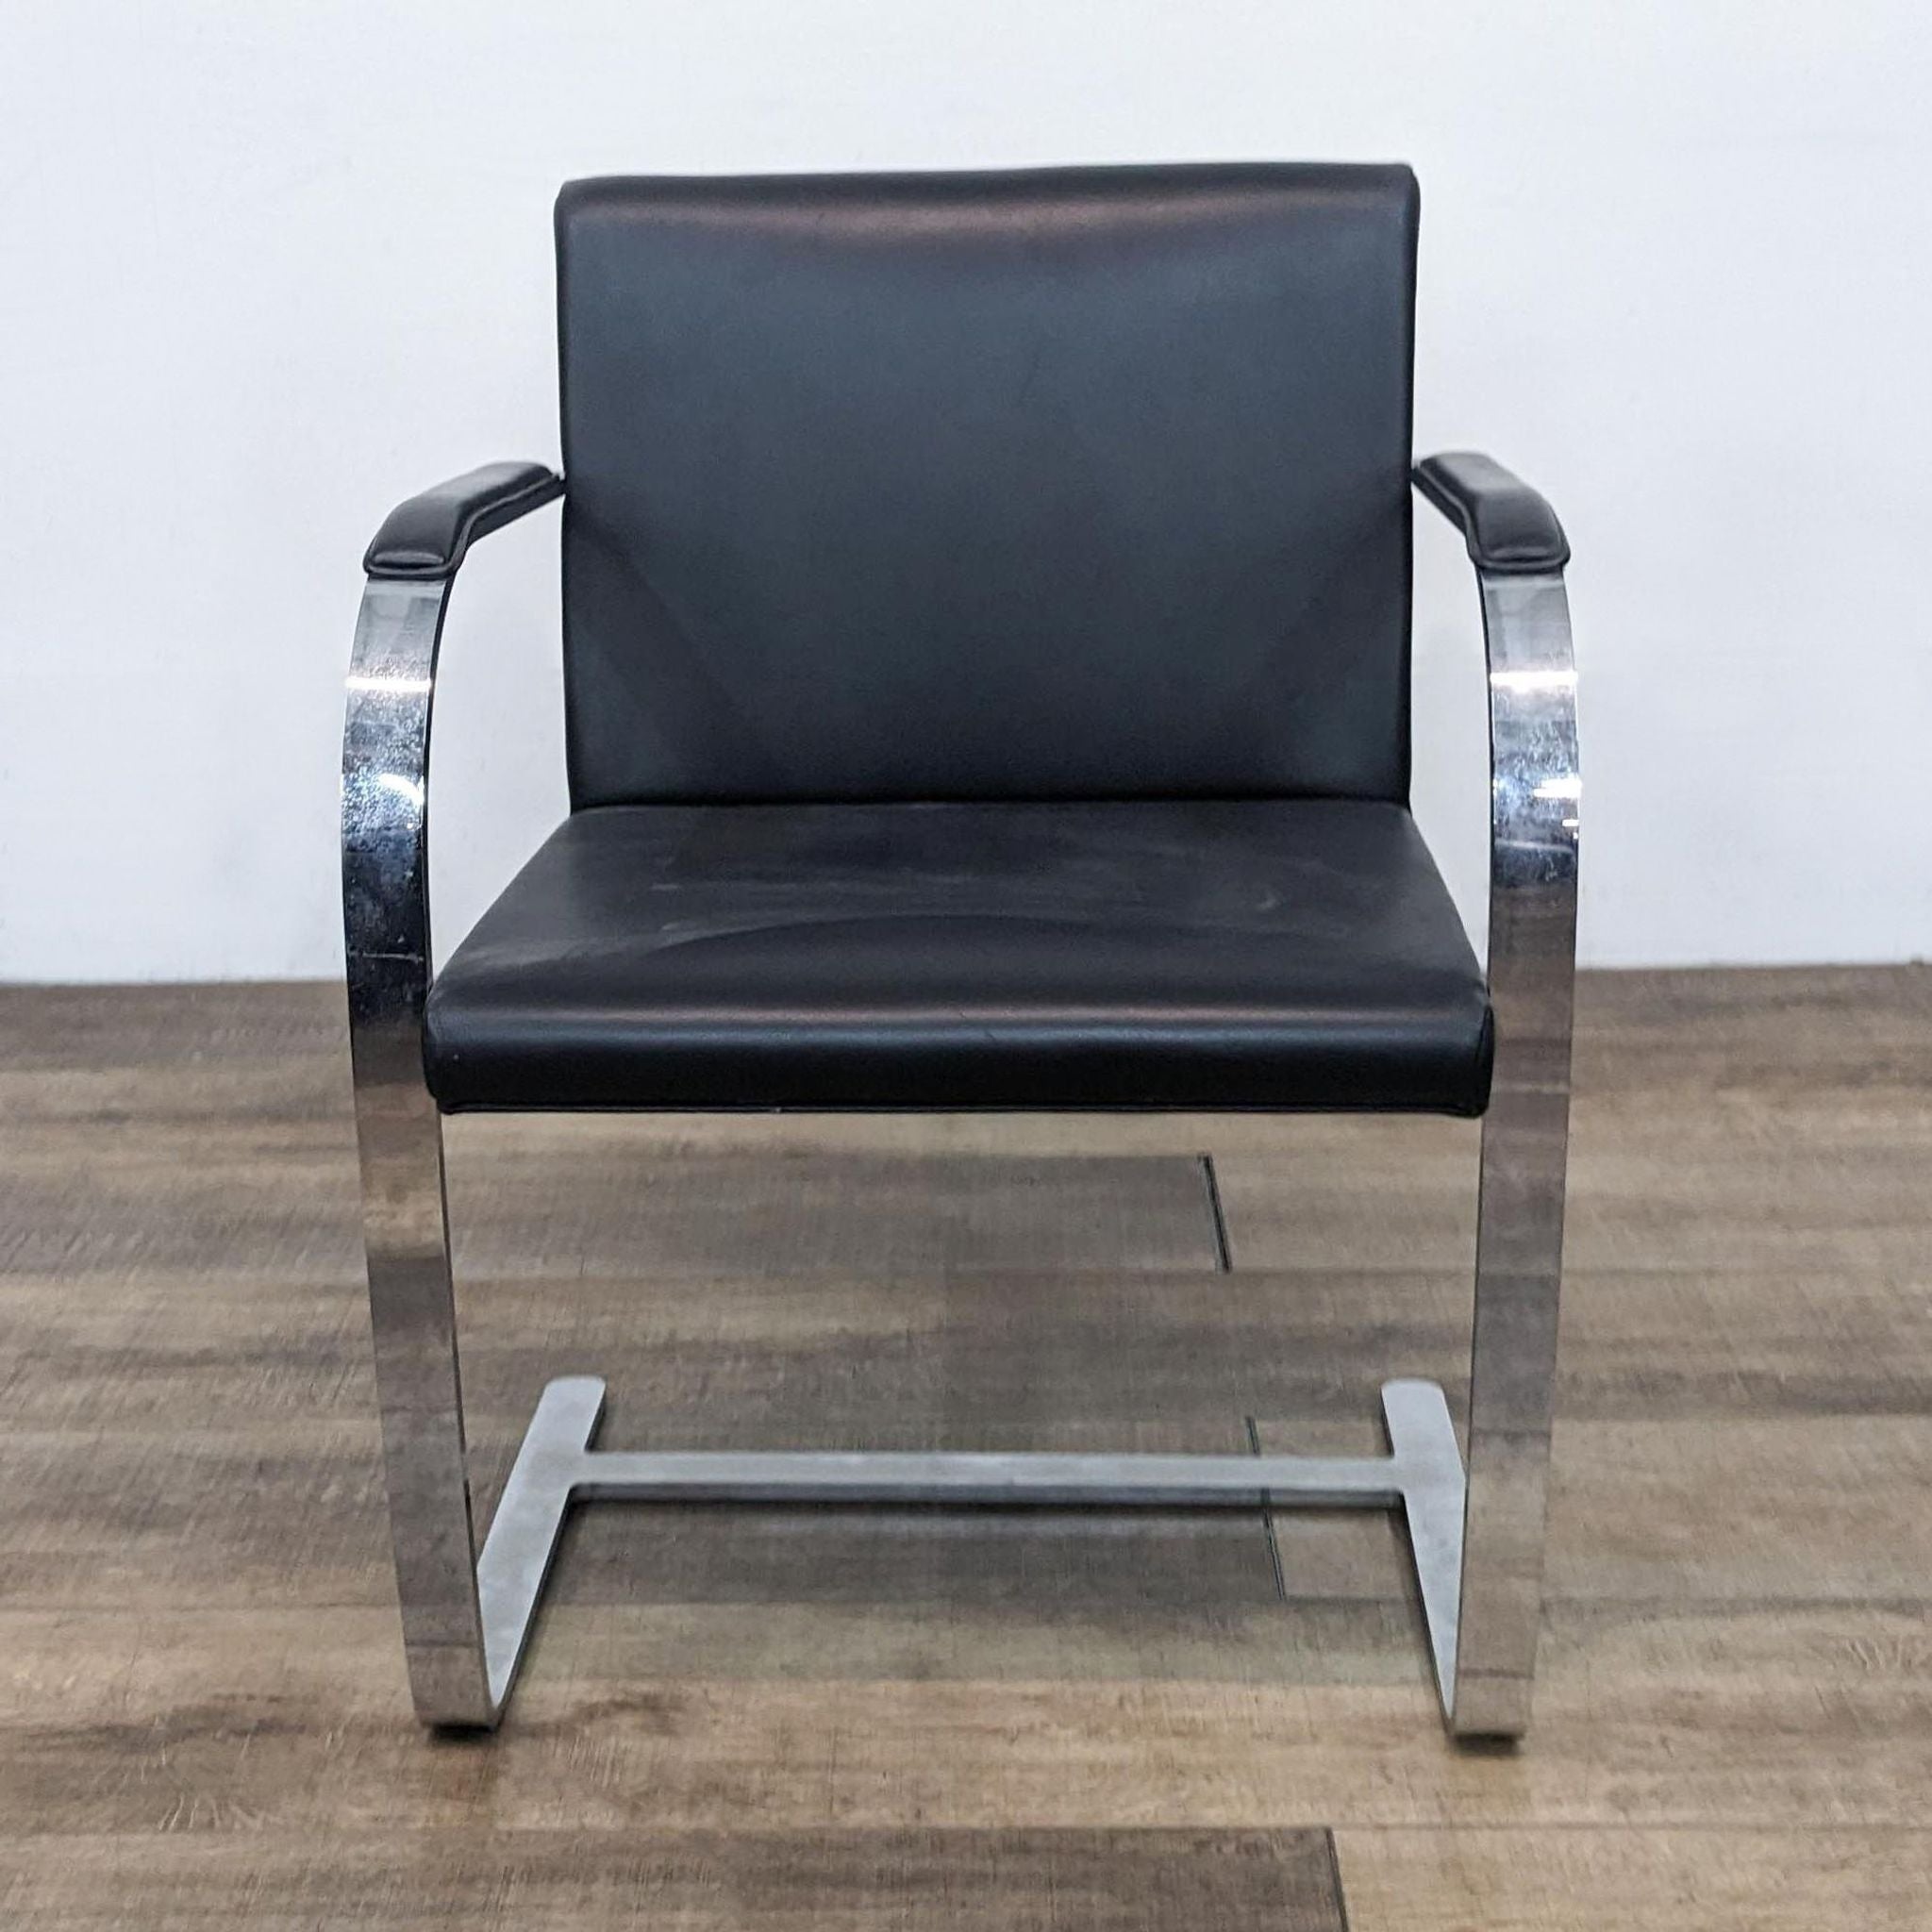 Alt text 1: A front view of a Reperch modern dining chair, featuring chrome steel legs and arms with a black faux leather cushioned seat.